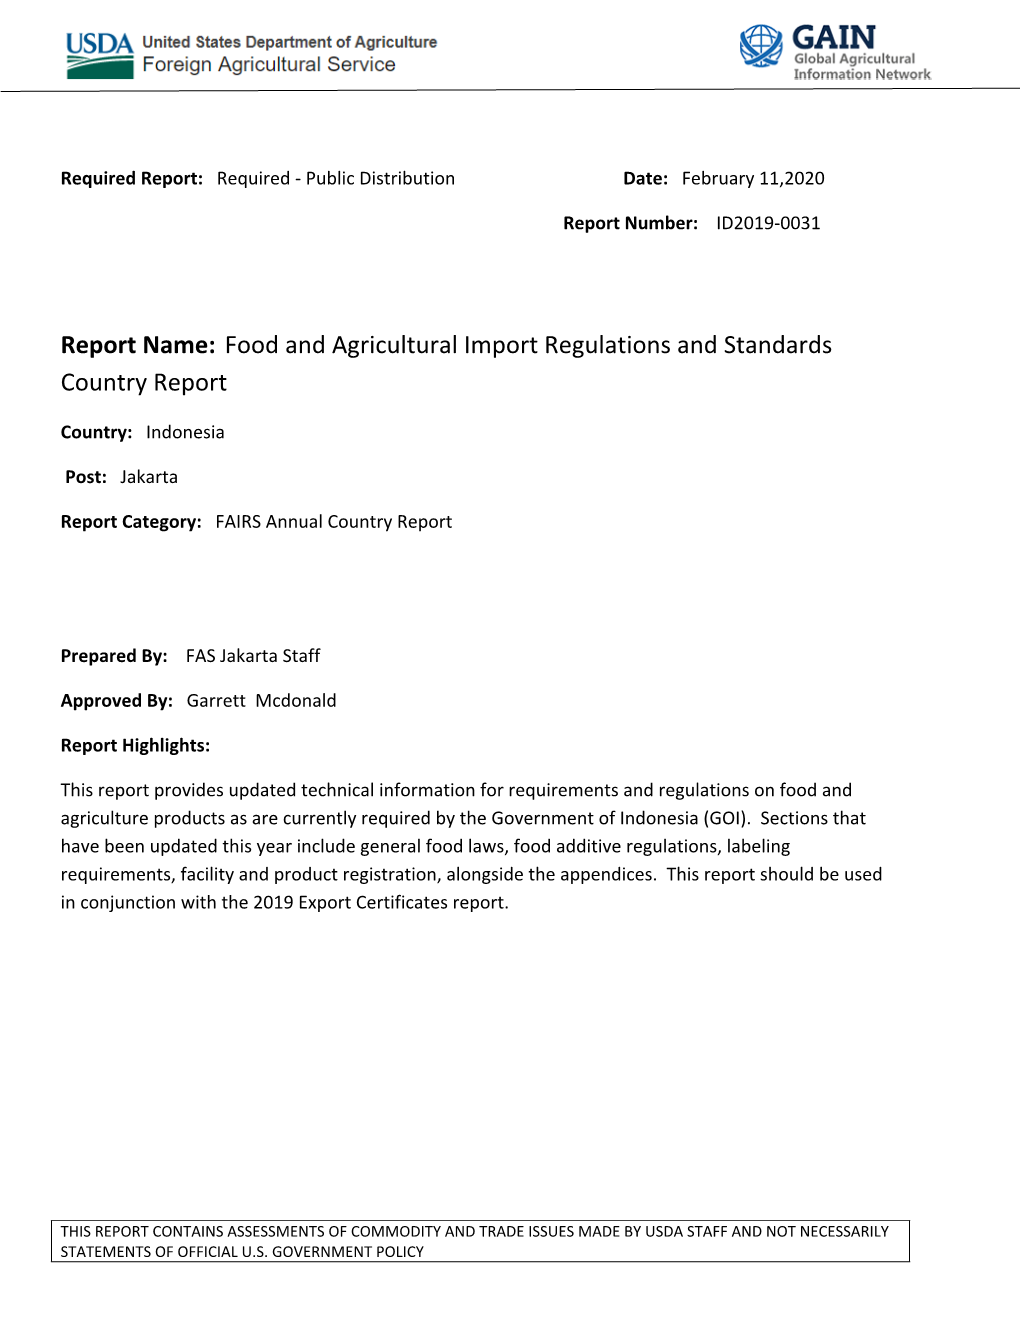 Report Name: Food and Agricultural Import Regulations and Standards Country Report